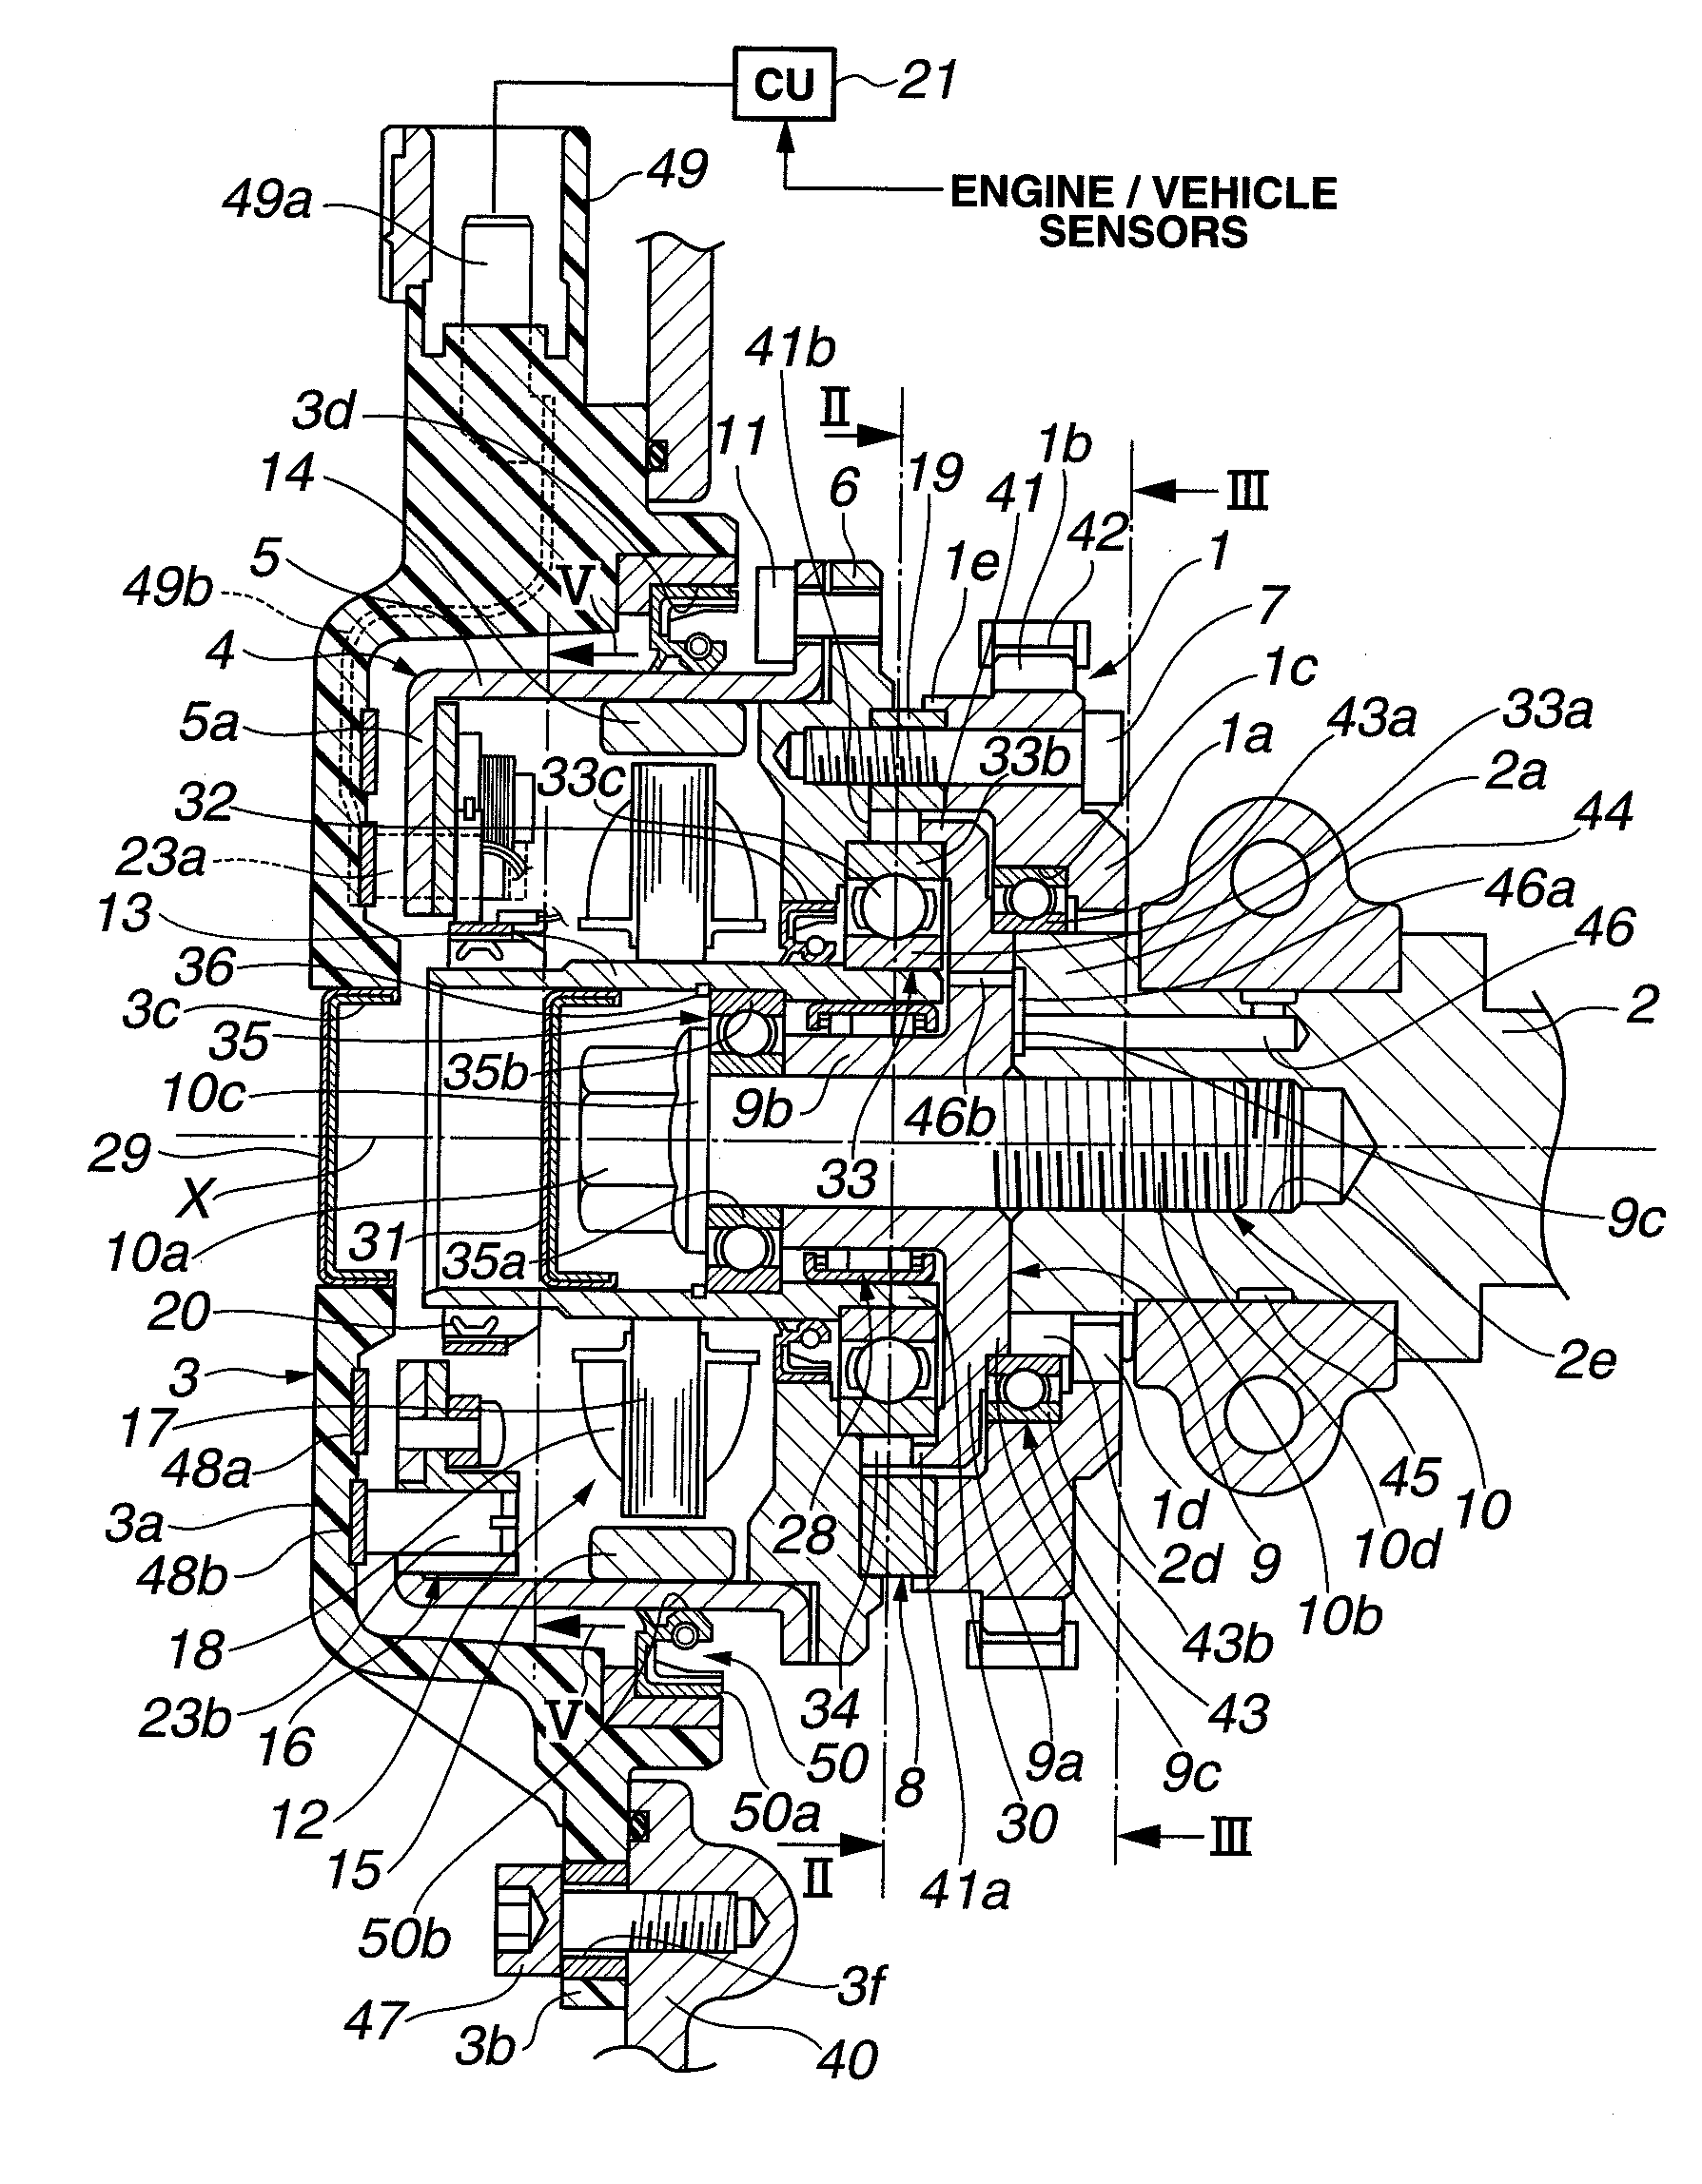 Variable valve actuation apparatus of internal combustion engine